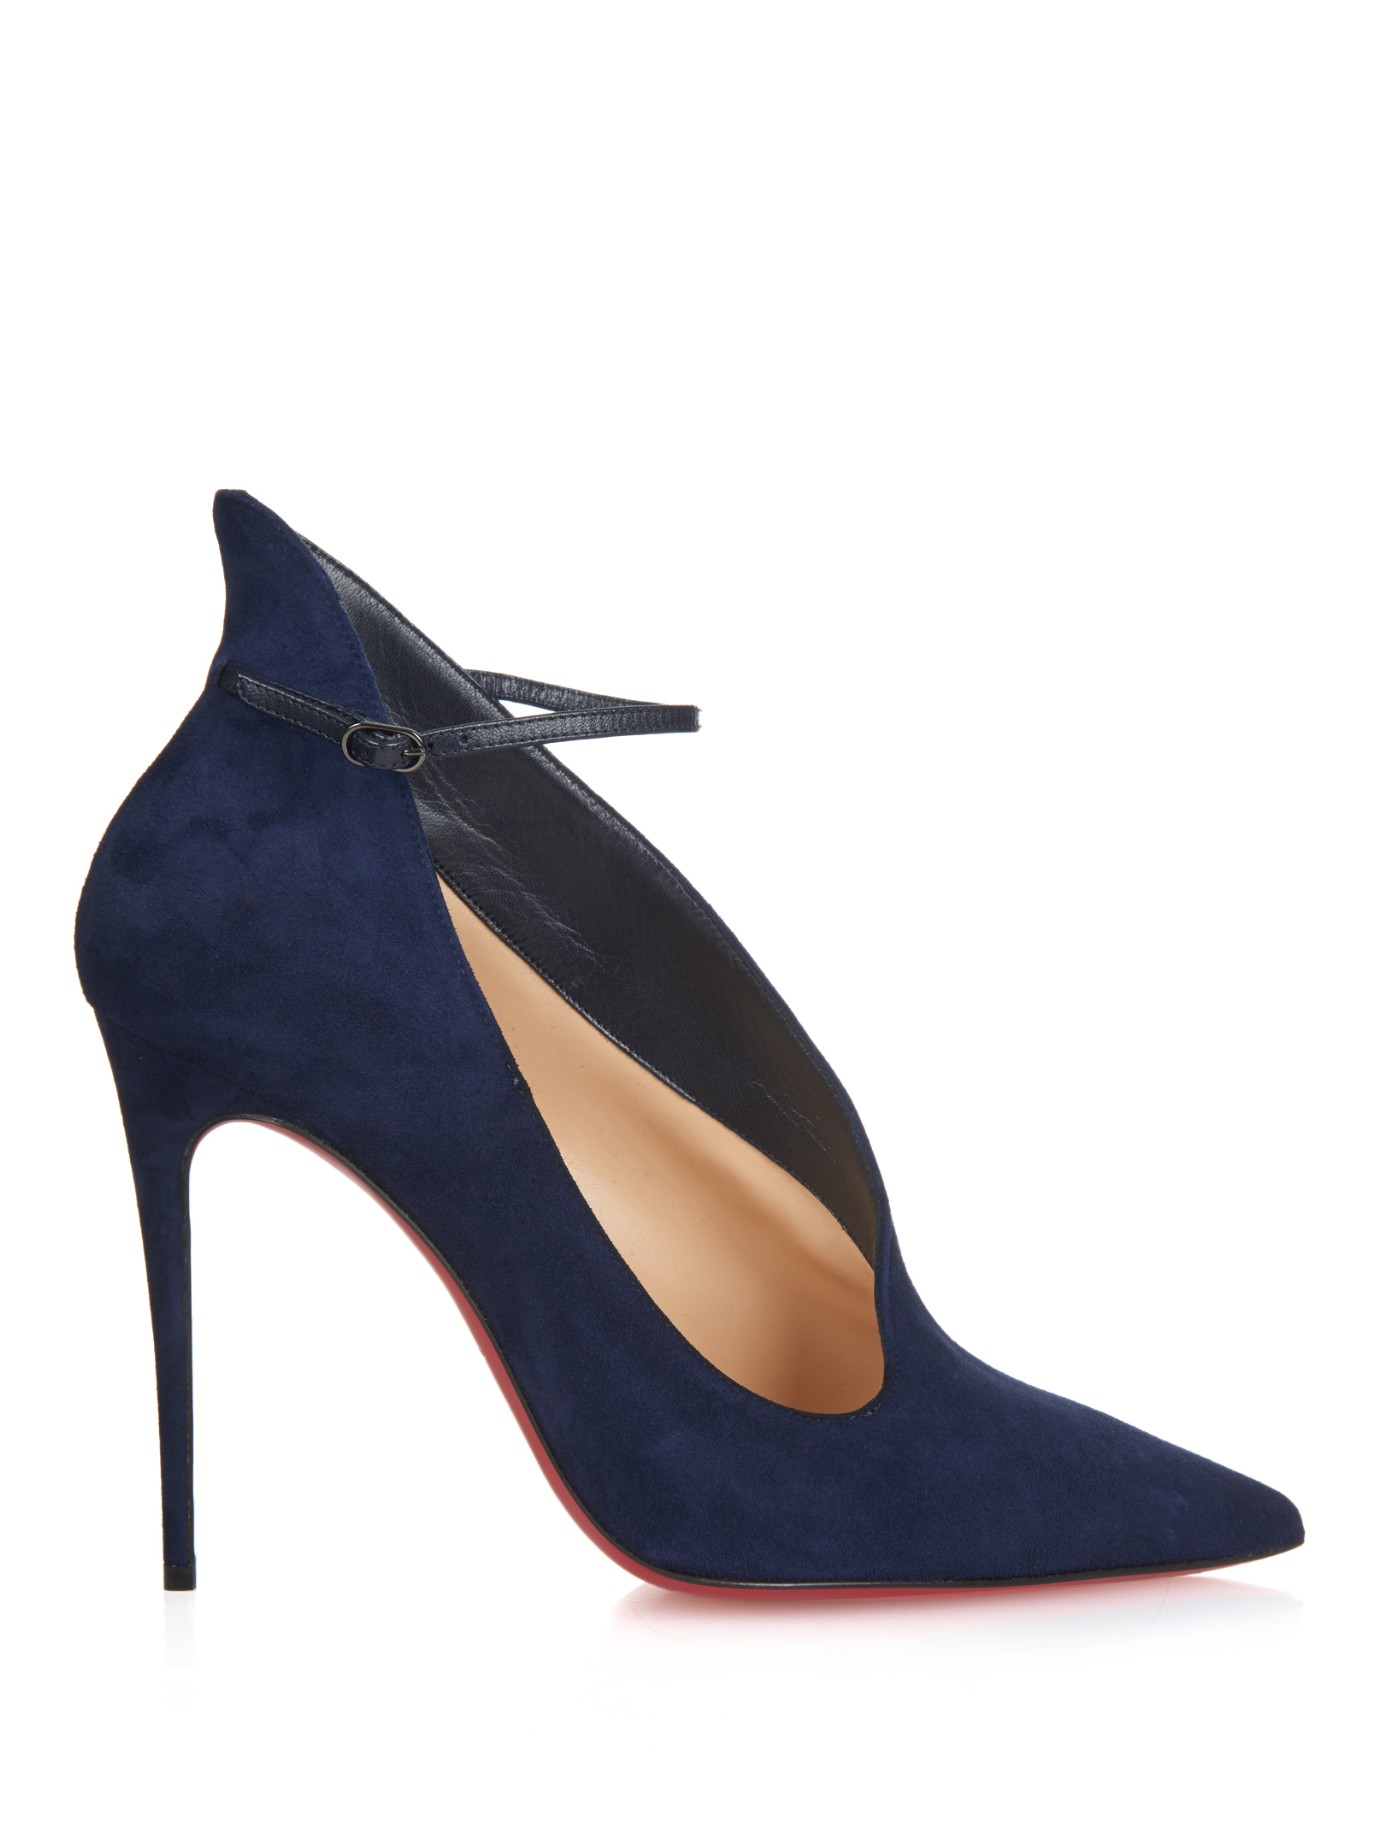 120mm Christian Louboutin Dark Blue V-neck Pumps paired with Louis